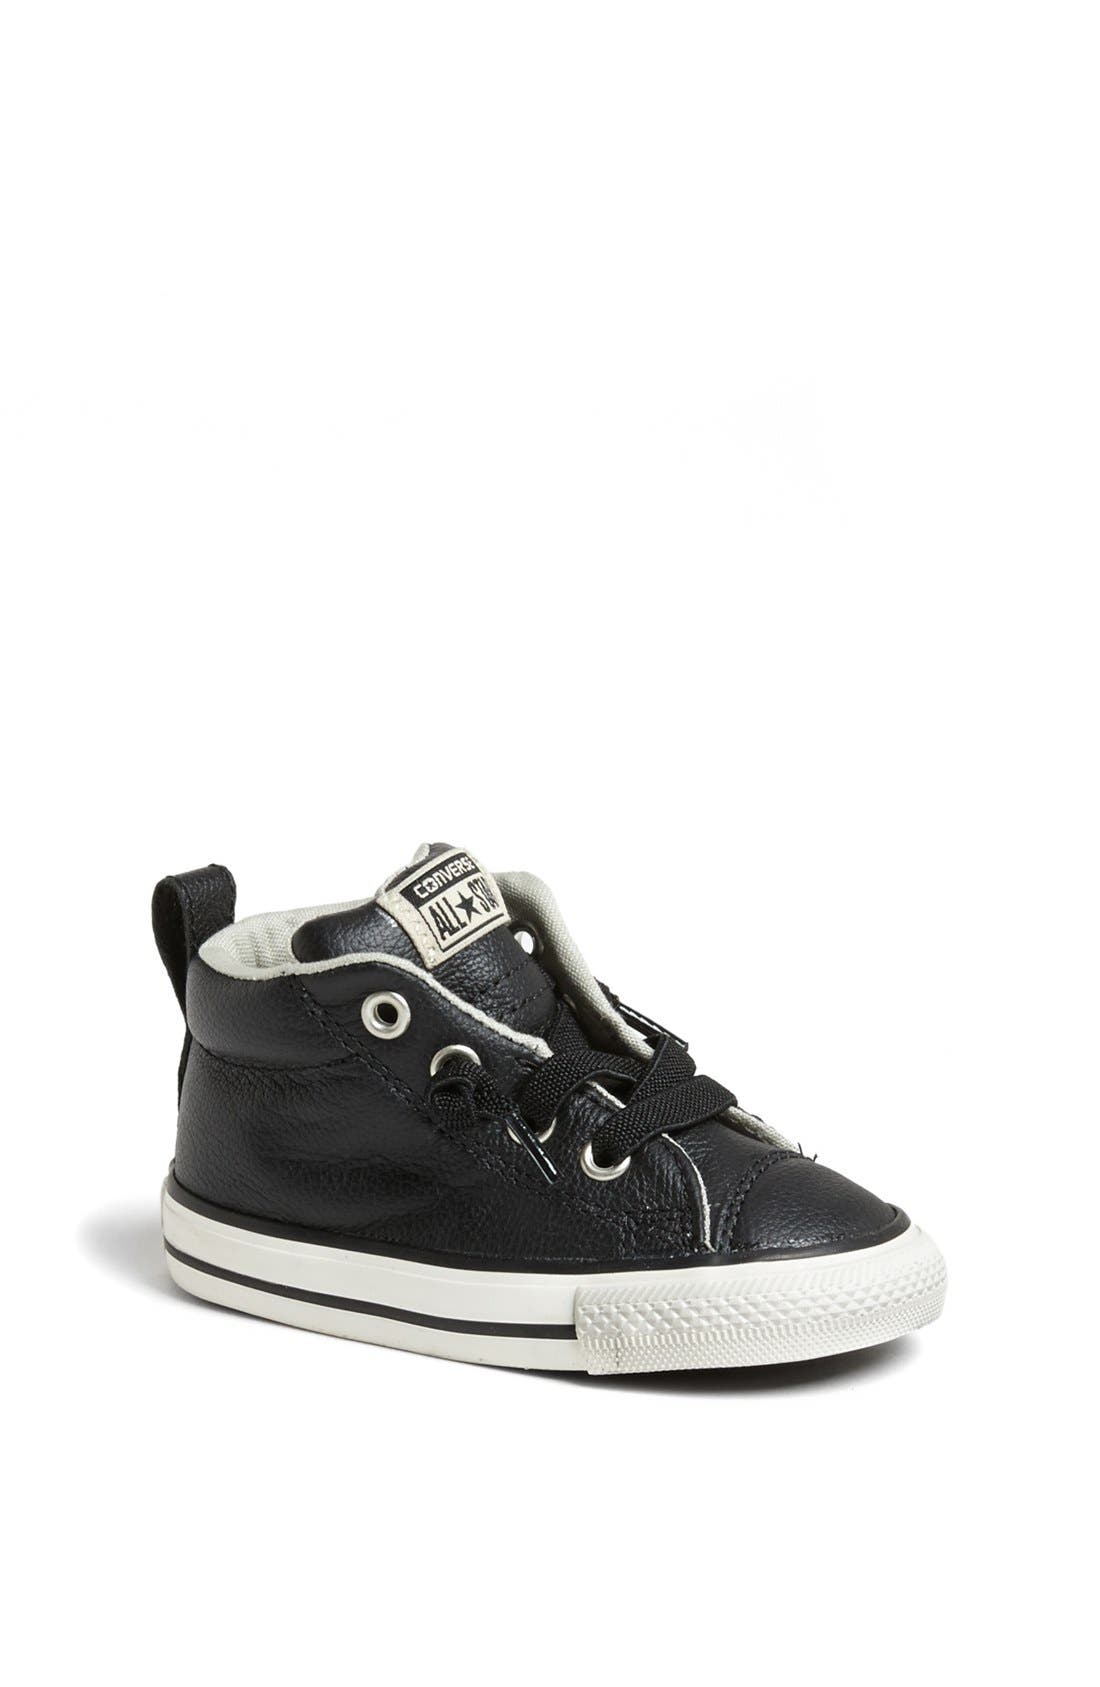 leather converse for toddlers